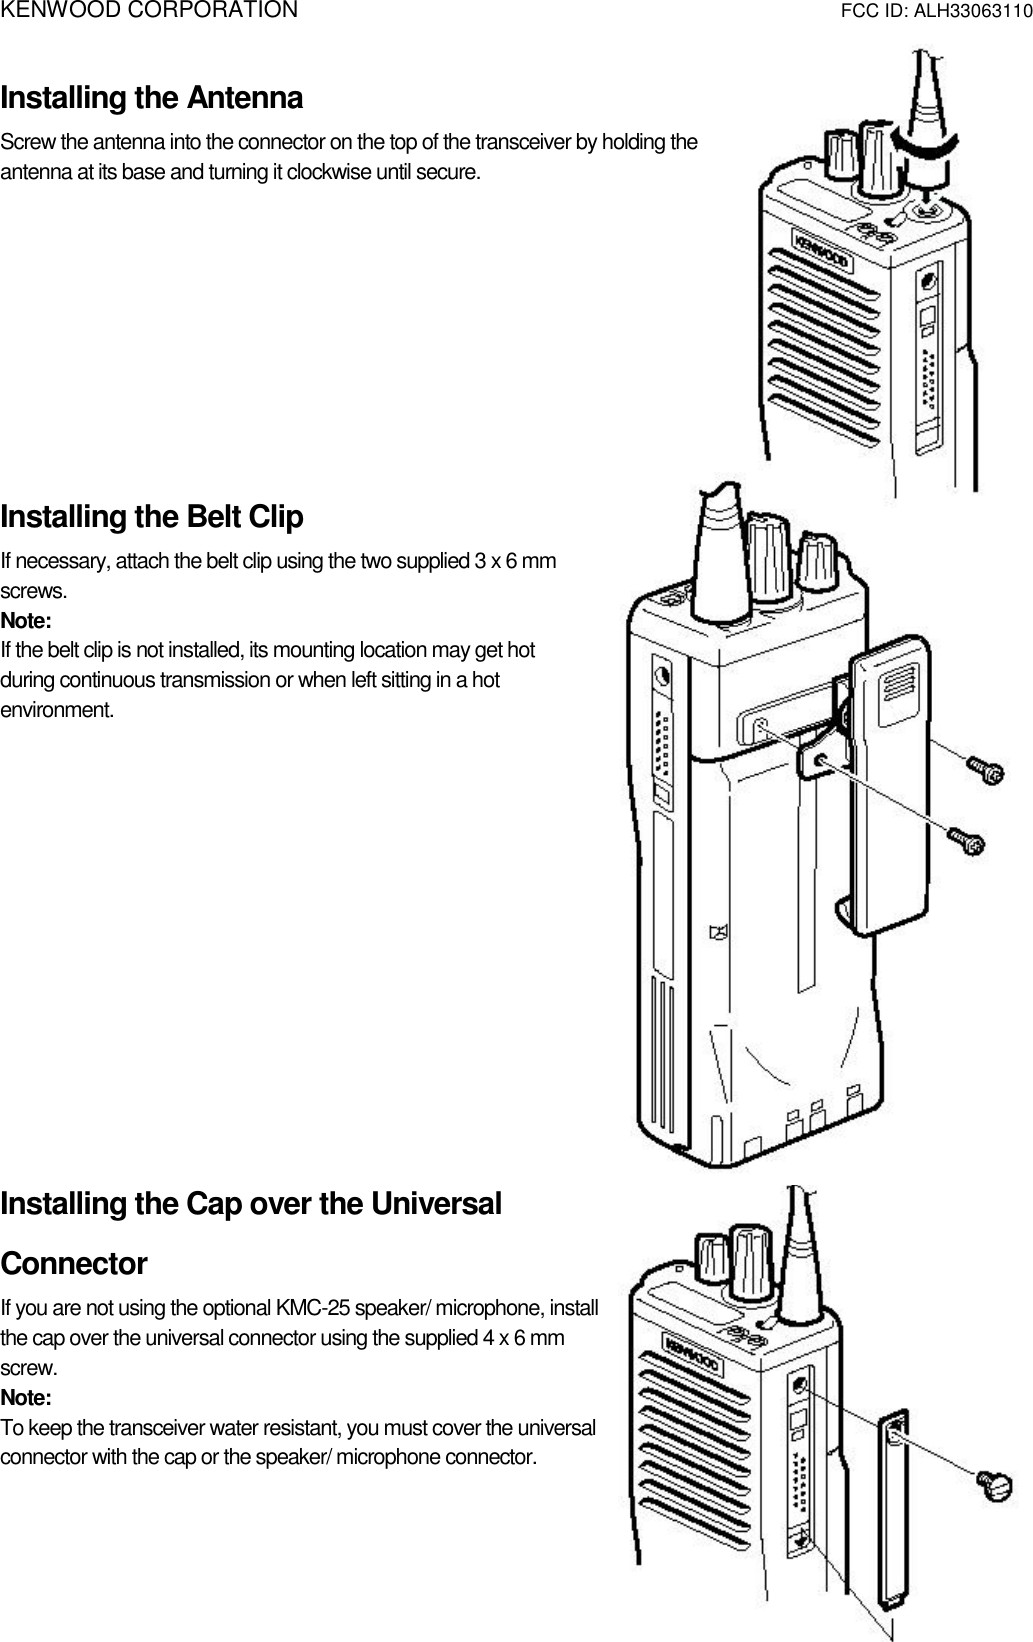 KENWOOD CORPORATION                        FCC ID: ALH33063110   Installing the Antenna Screw the antenna into the connector on the top of the transceiver by holding the antenna at its base and turning it clockwise until secure.      Installing the Belt Clip If necessary, attach the belt clip using the two supplied 3 x 6 mm screws. Note:  If the belt clip is not installed, its mounting location may get hot during continuous transmission or when left sitting in a hot environment.          Installing the Cap over the Universal Connector If you are not using the optional KMC-25 speaker/ microphone, install the cap over the universal connector using the supplied 4 x 6 mm screw. Note:  To keep the transceiver water resistant, you must cover the universal connector with the cap or the speaker/ microphone connector.   